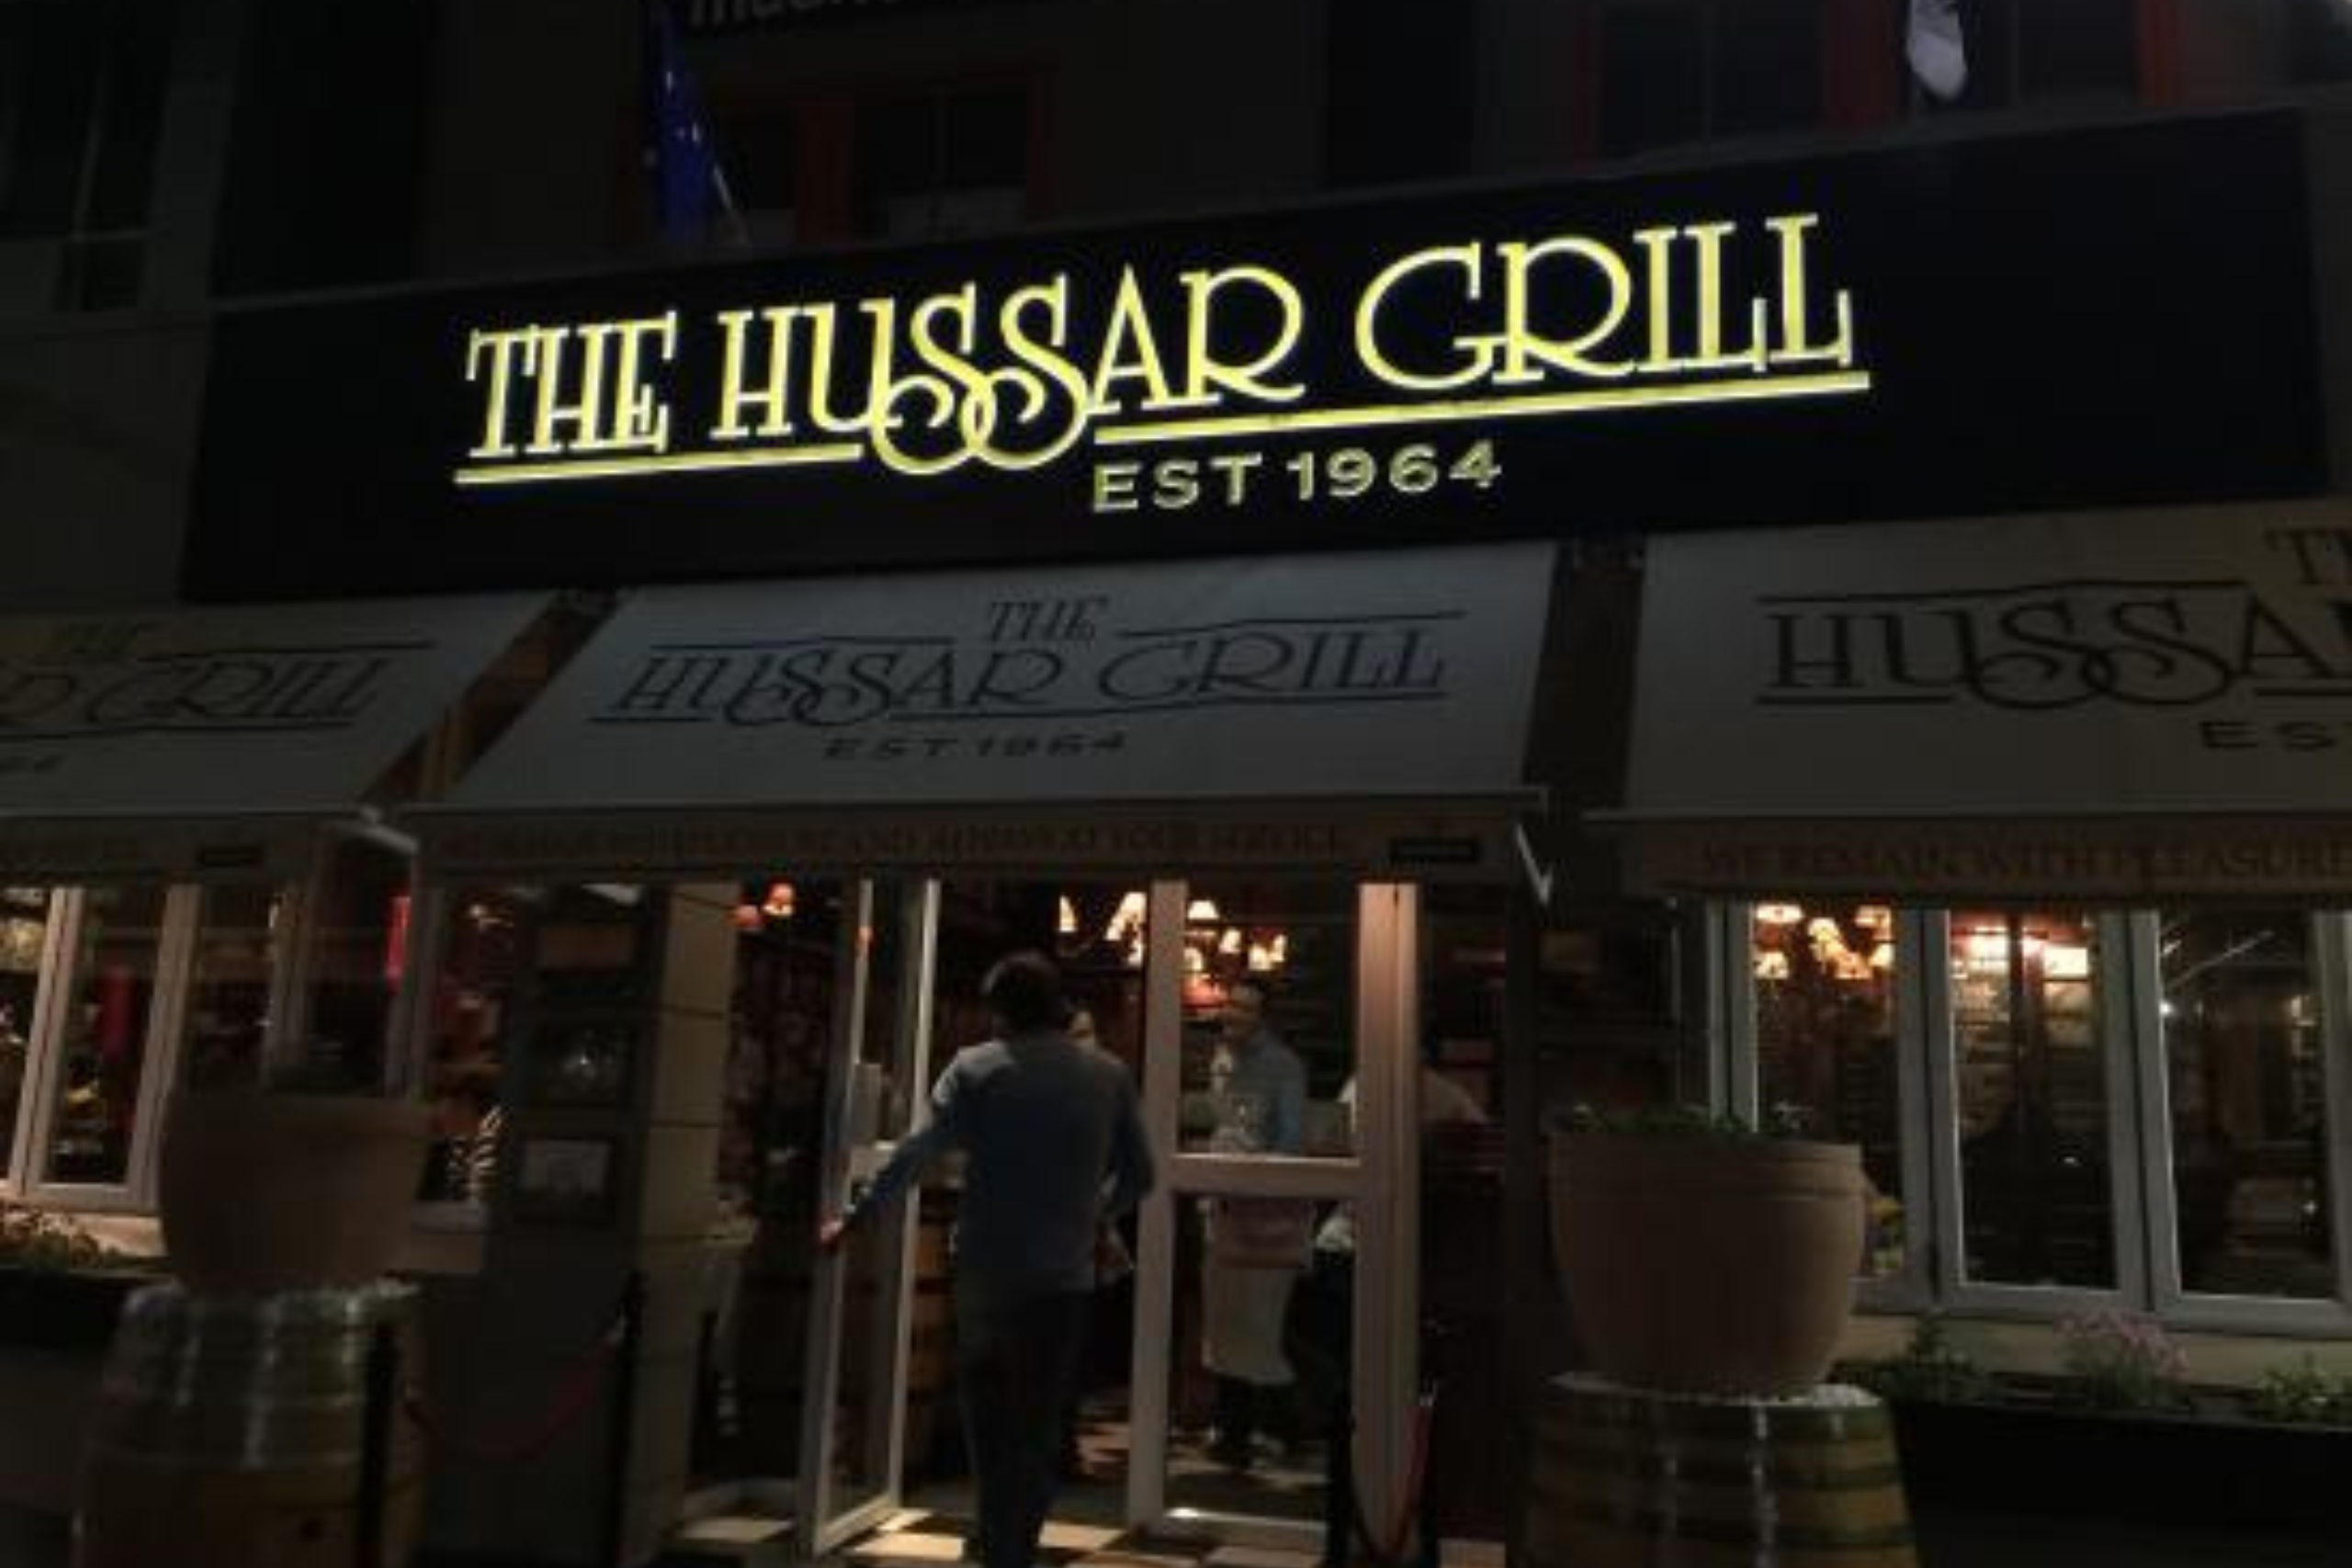 The Hussar Grill